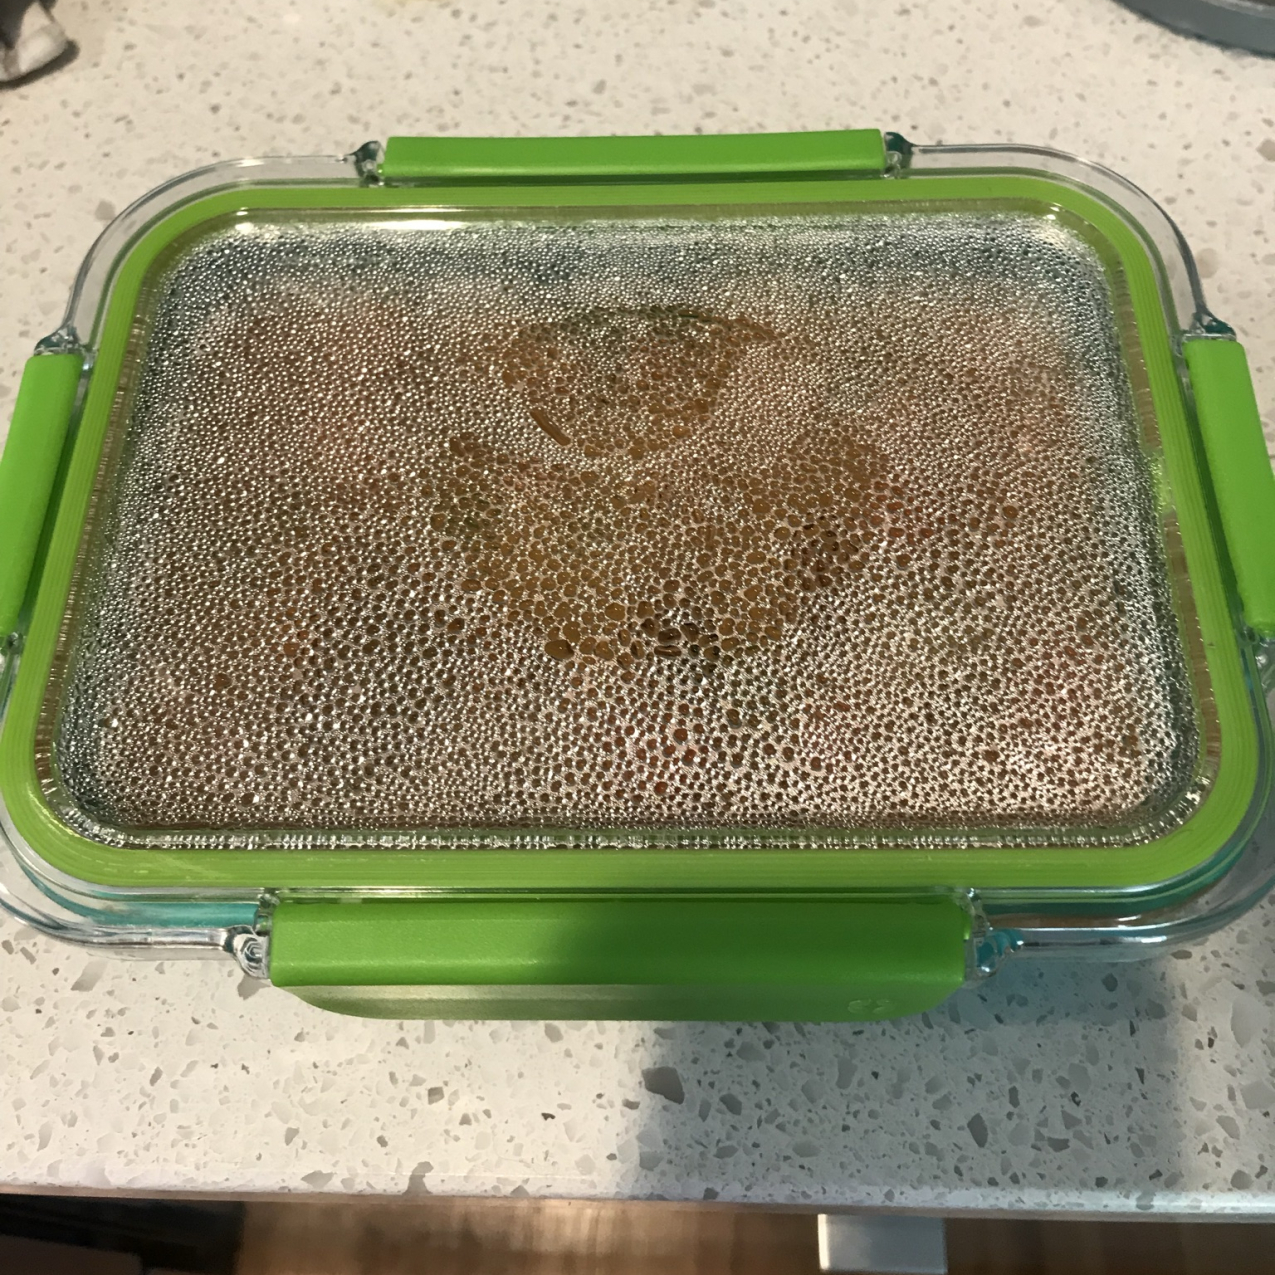 Droplets of water have formed on the clear lid of a container of leftovers. Larger droplets form the shape of the NOAA logo.